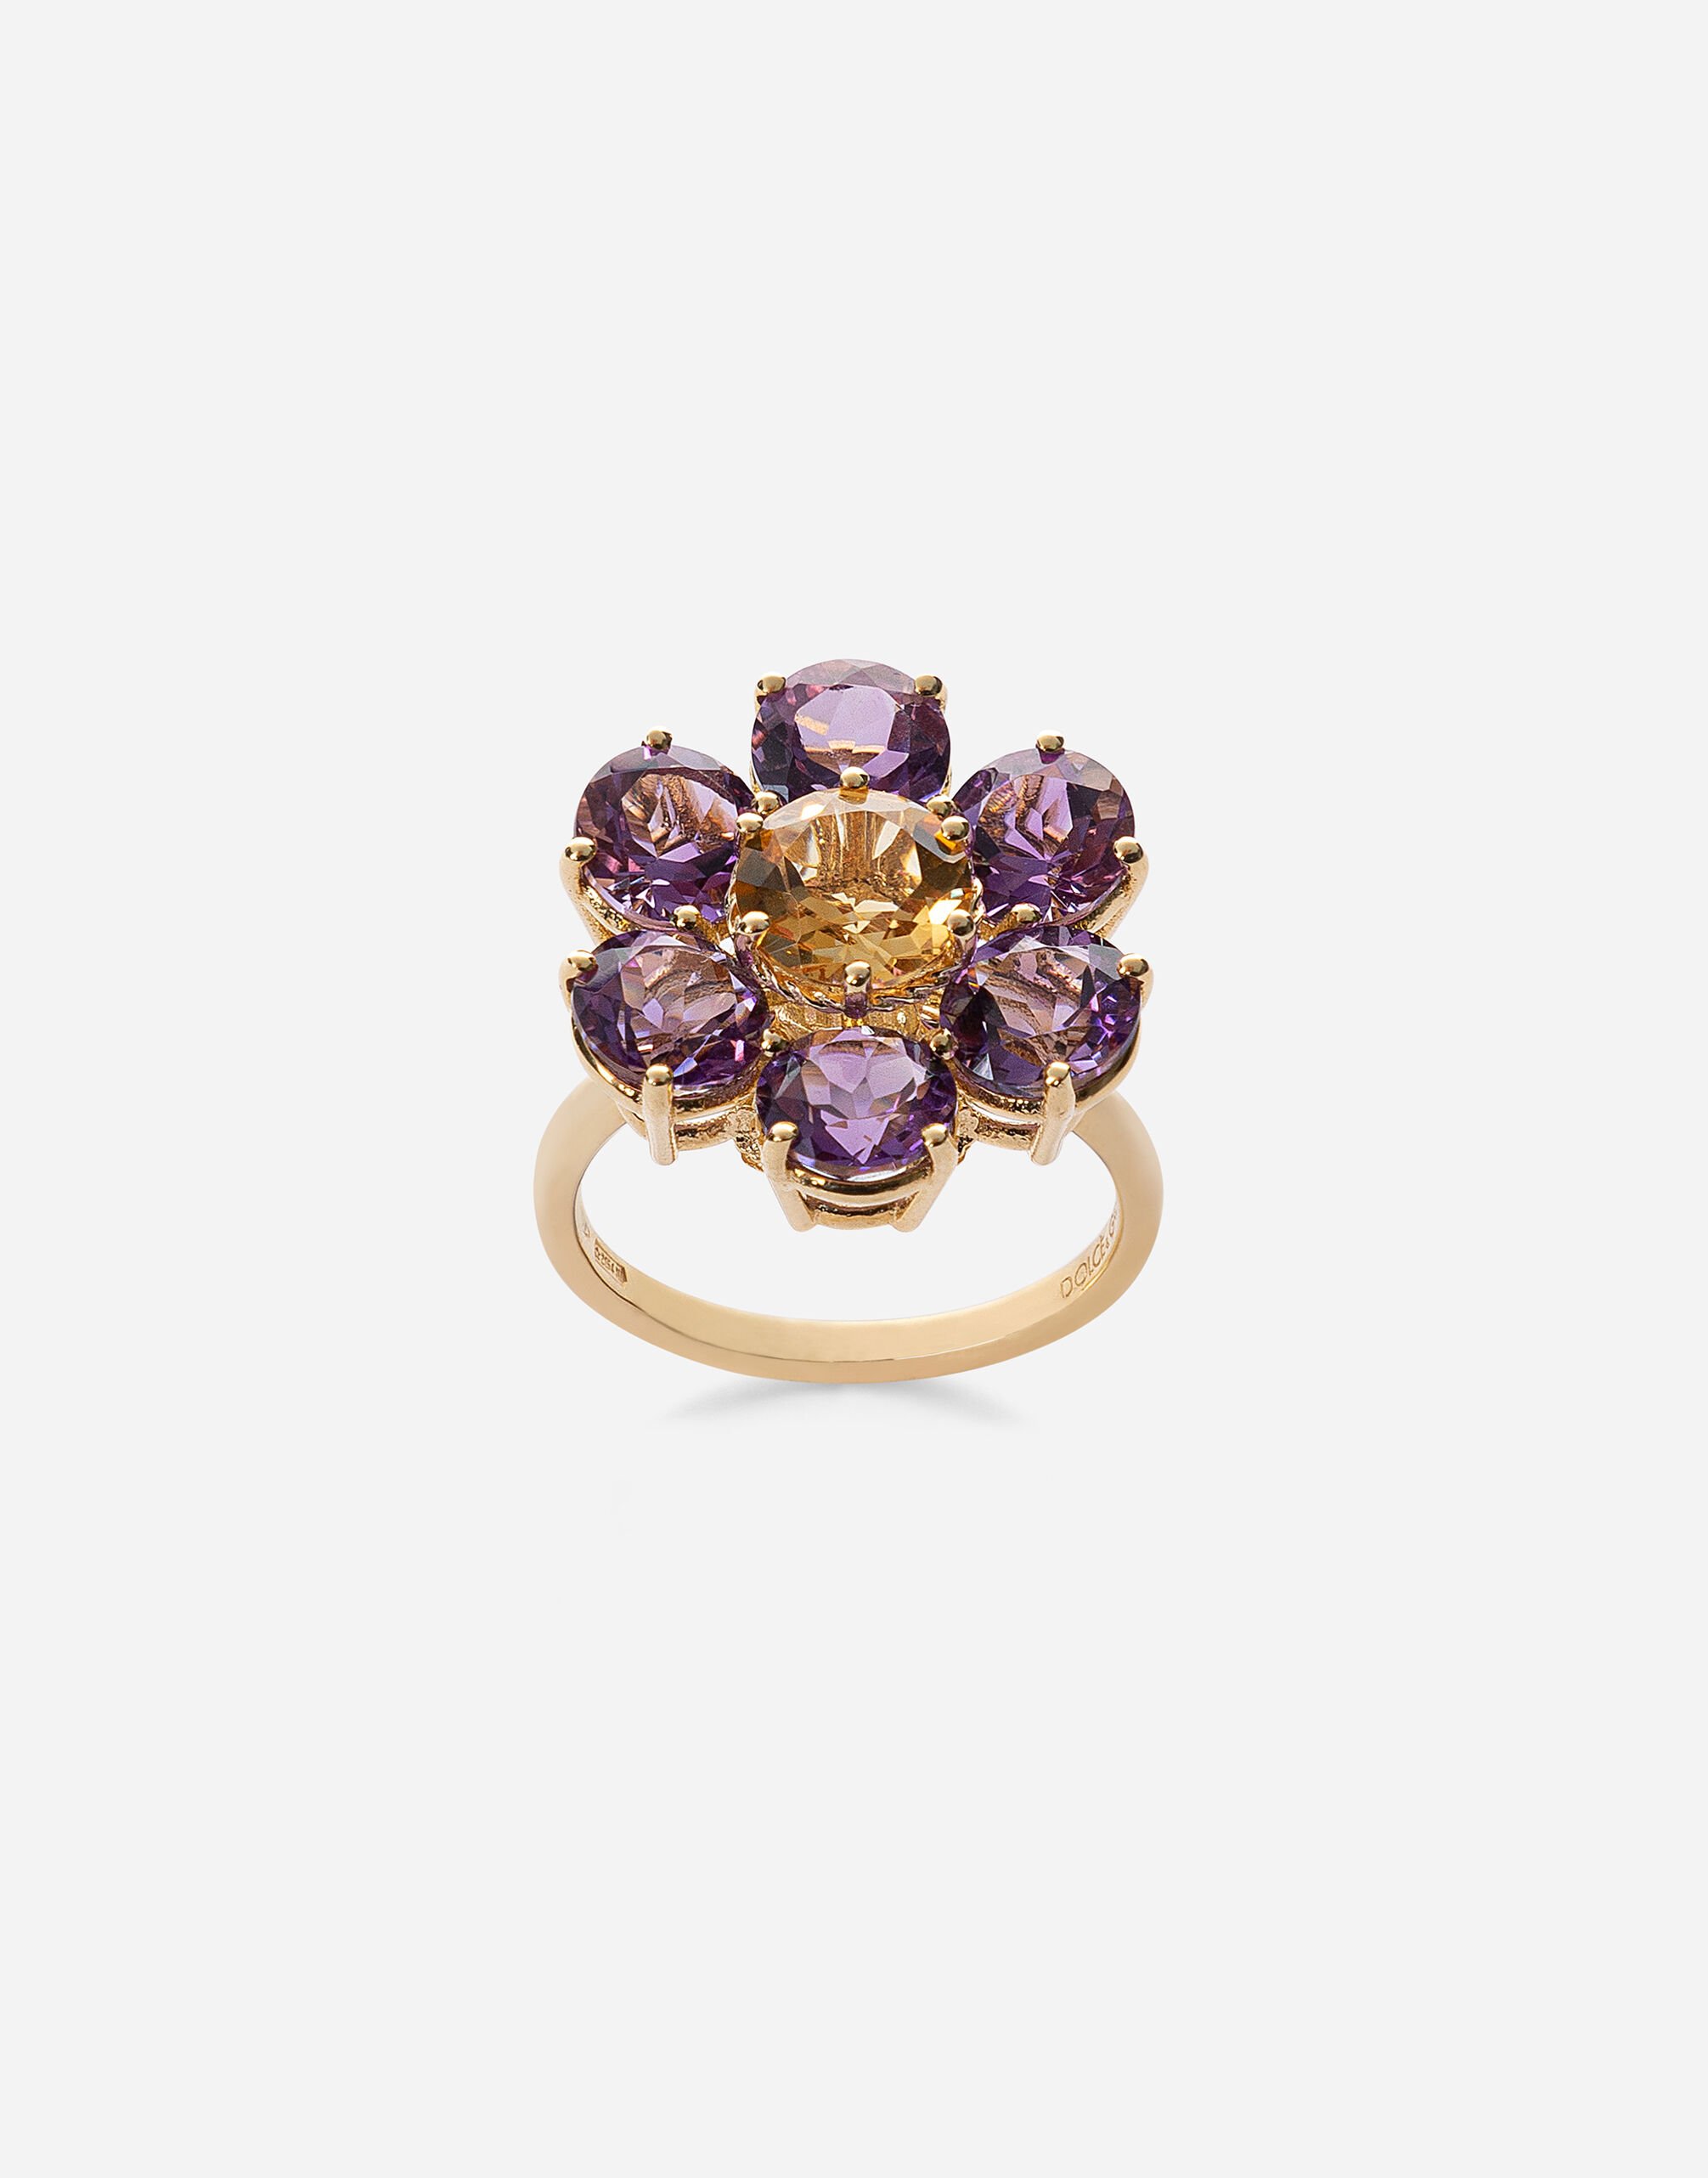 Dolce & Gabbana Spring ring in yellow 18kt gold with amethyst floral motif Gold WRMR1GWMIXS